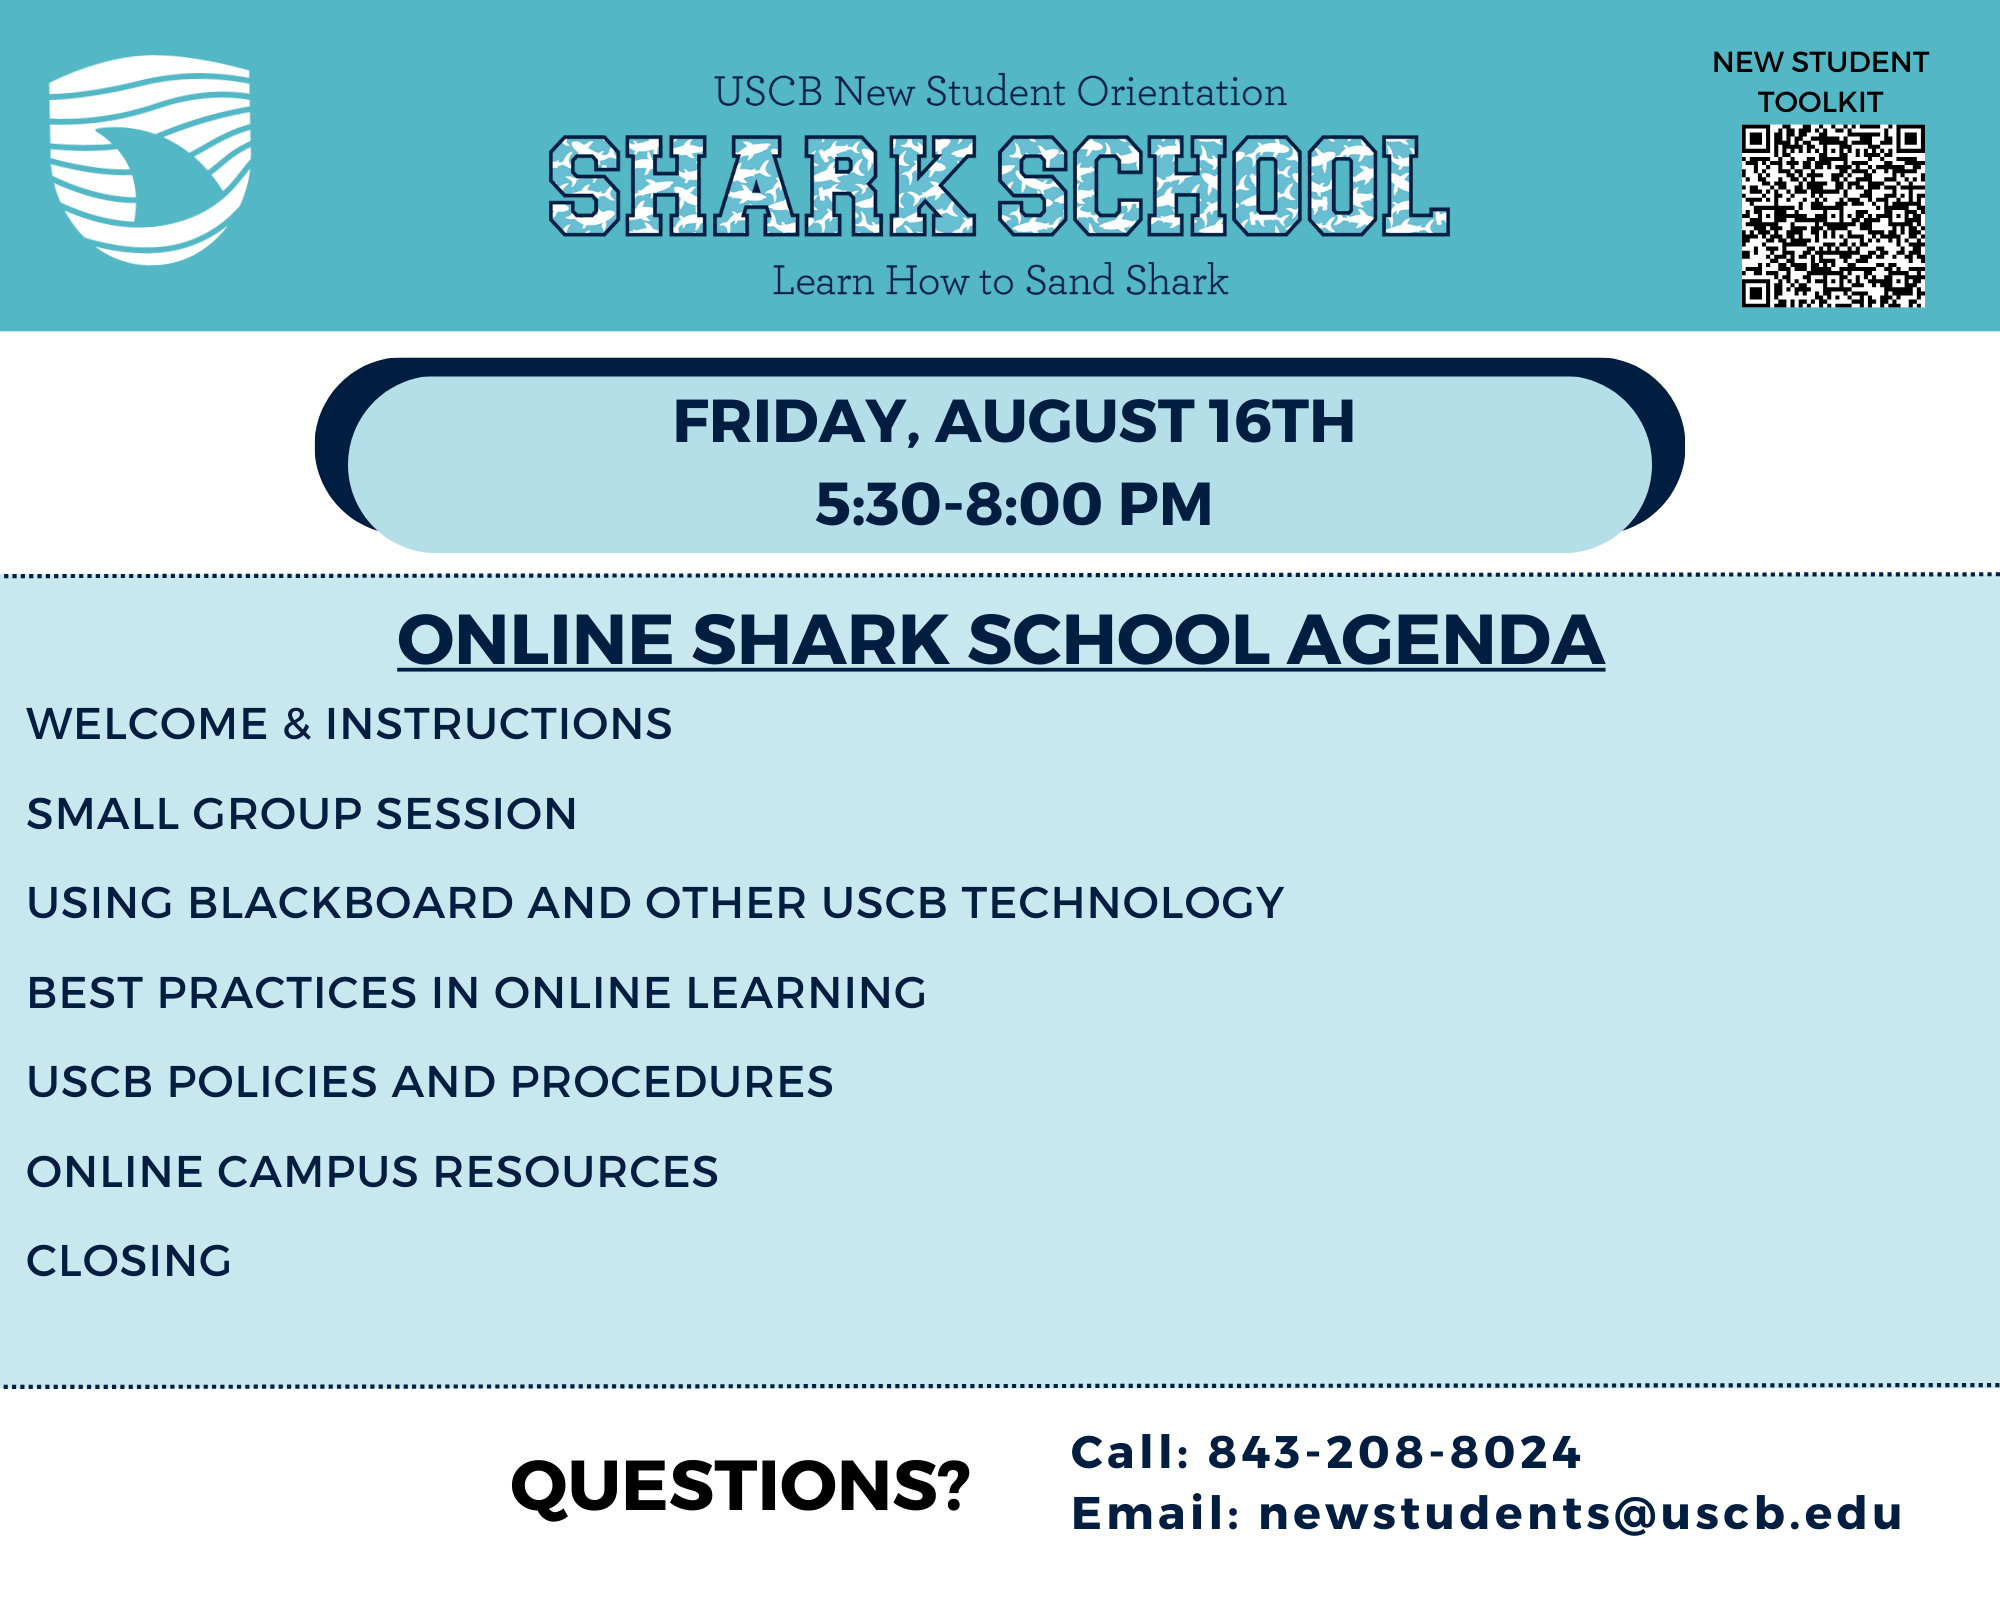 FRIDAY, AUGUST 16TH, 5:30-8:00 PM  ONLINE SHARK SCHOOL AGENDA WELCOME & INSTRUCTIONS SMALL GROUP SESSION USING BLACKBOARD AND OTHER USCB TECHNOLOGY  BEST PRACTICES IN ONLINE LEARNING USCB POLICIES AND PROCEDURES  ONLINE CAMPUS RESOURCES CLOSING Questions?  Call: 843-208-8024  Email: newstudents@uscb.edu